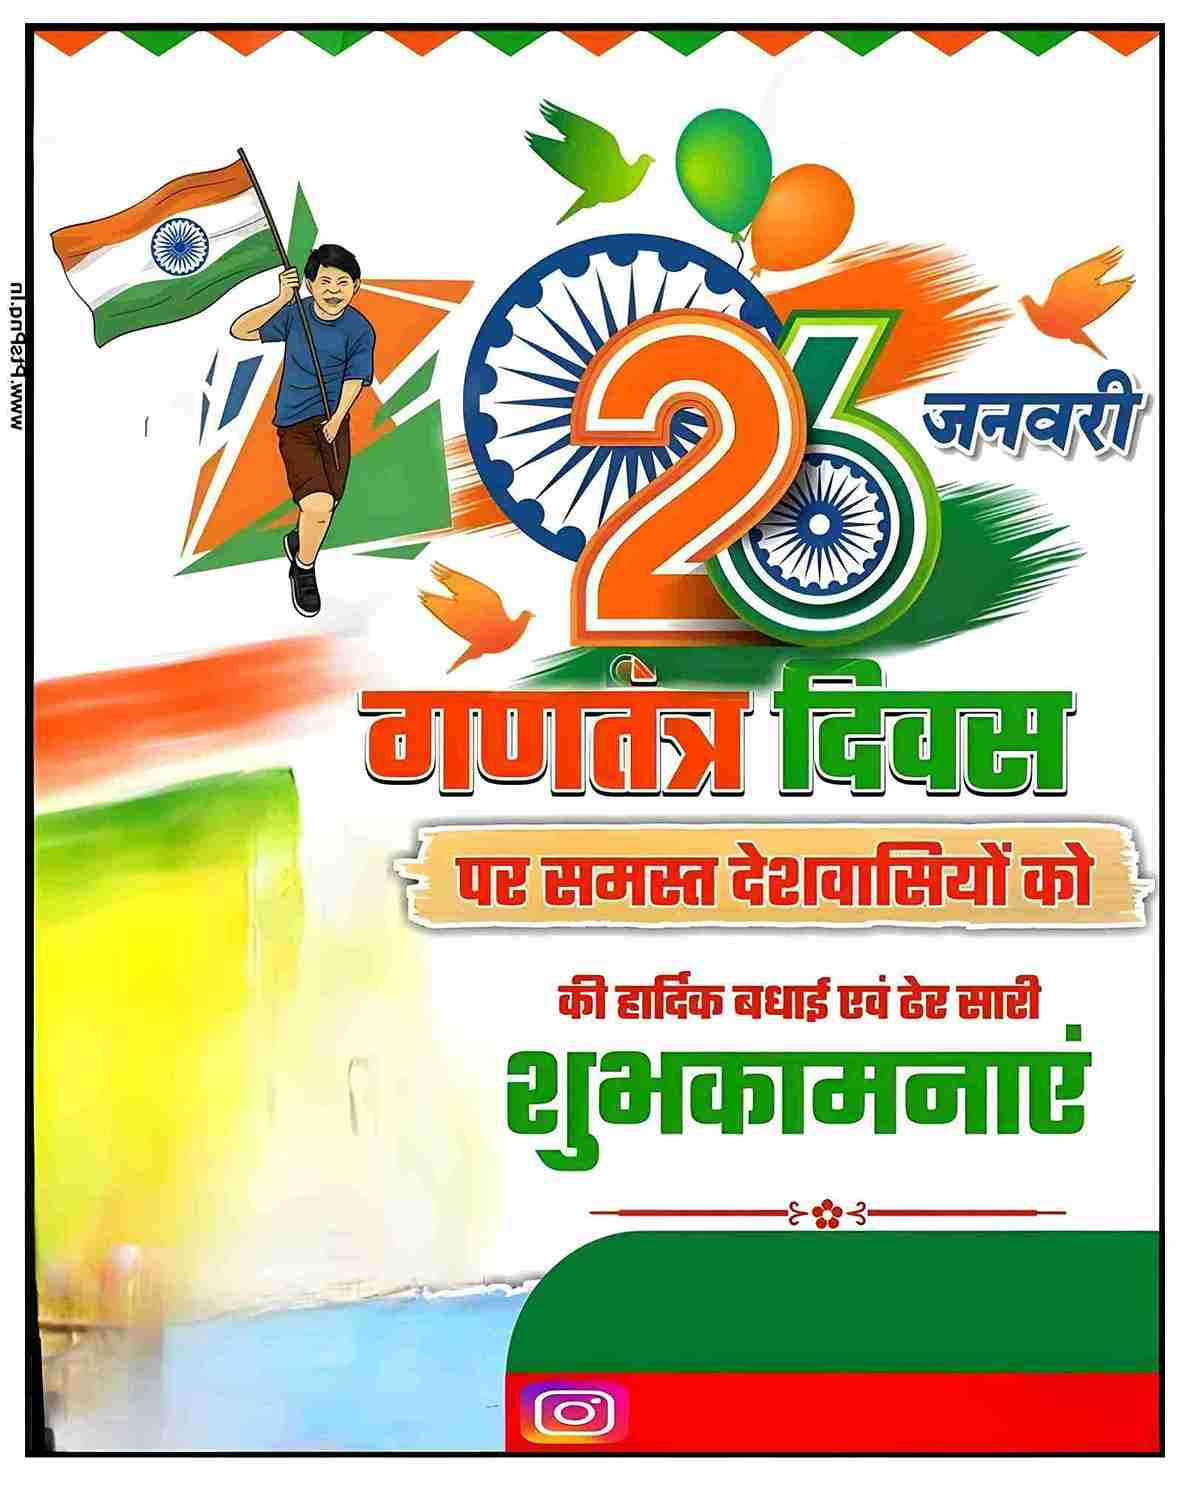 Happy republic day poster background